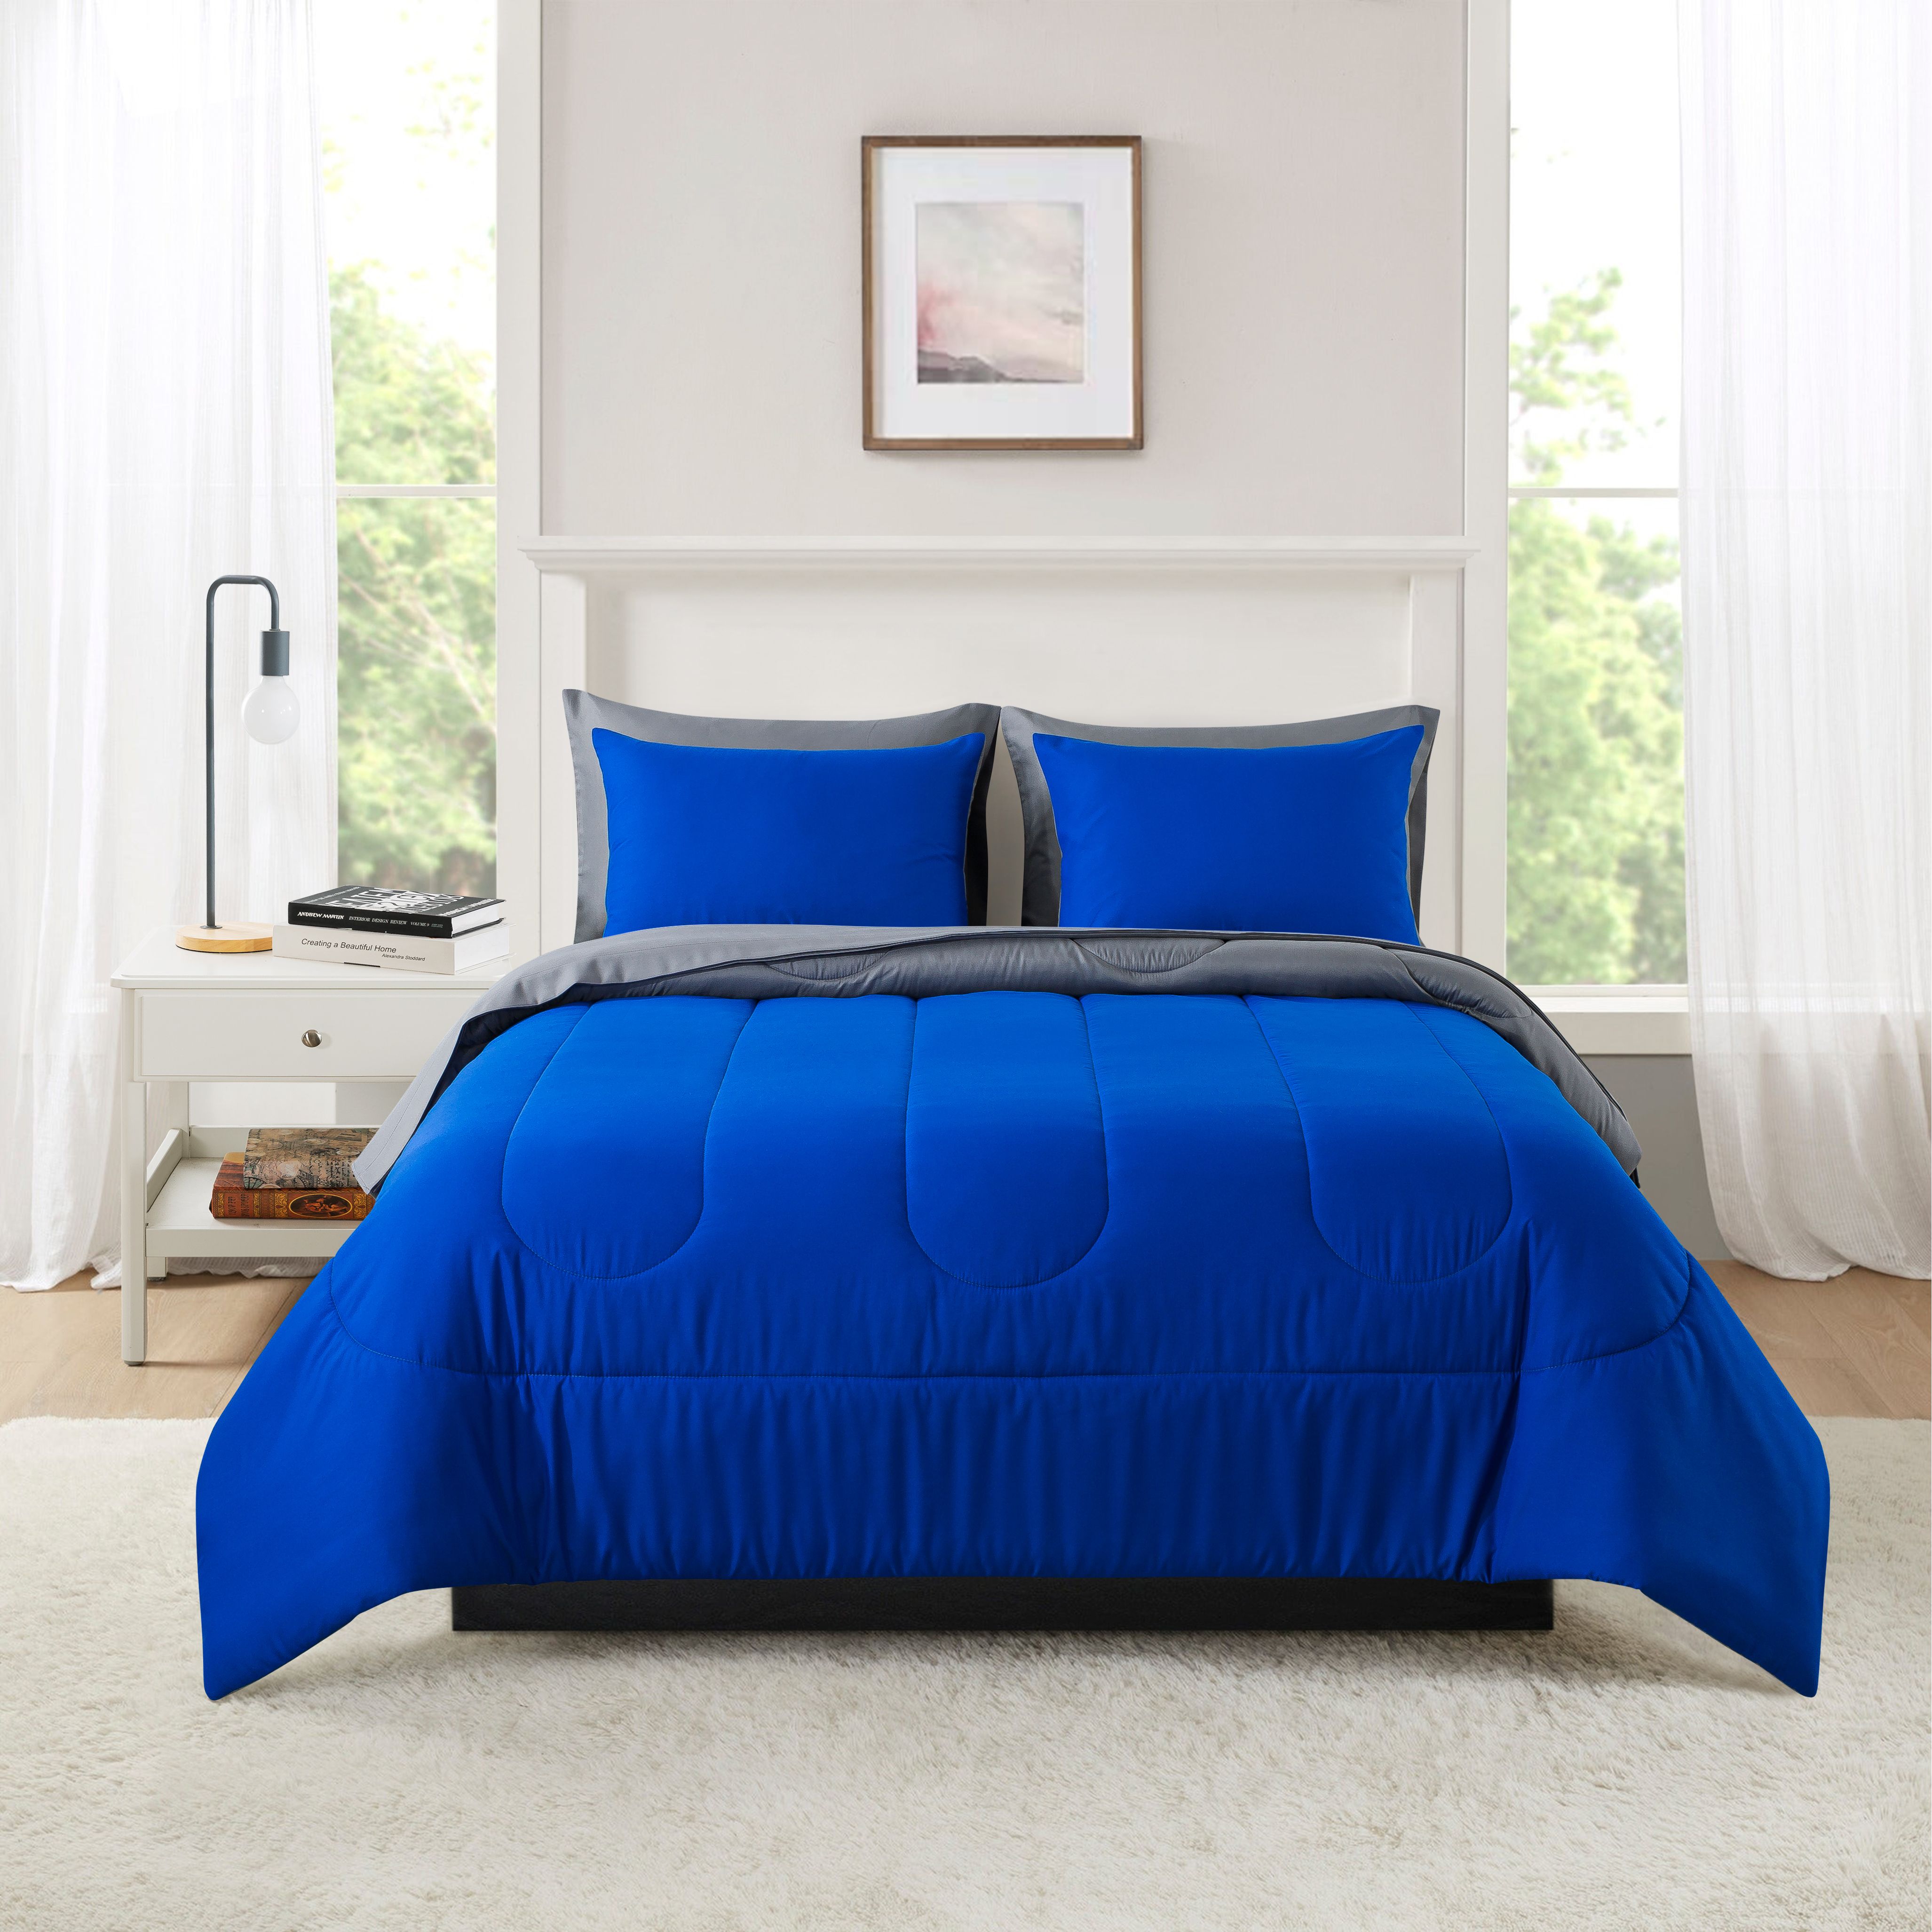 Mainstays Blue Reversible 7-Piece Bed in a Bag Comforter Set with Sheets, Queen - image 1 of 12